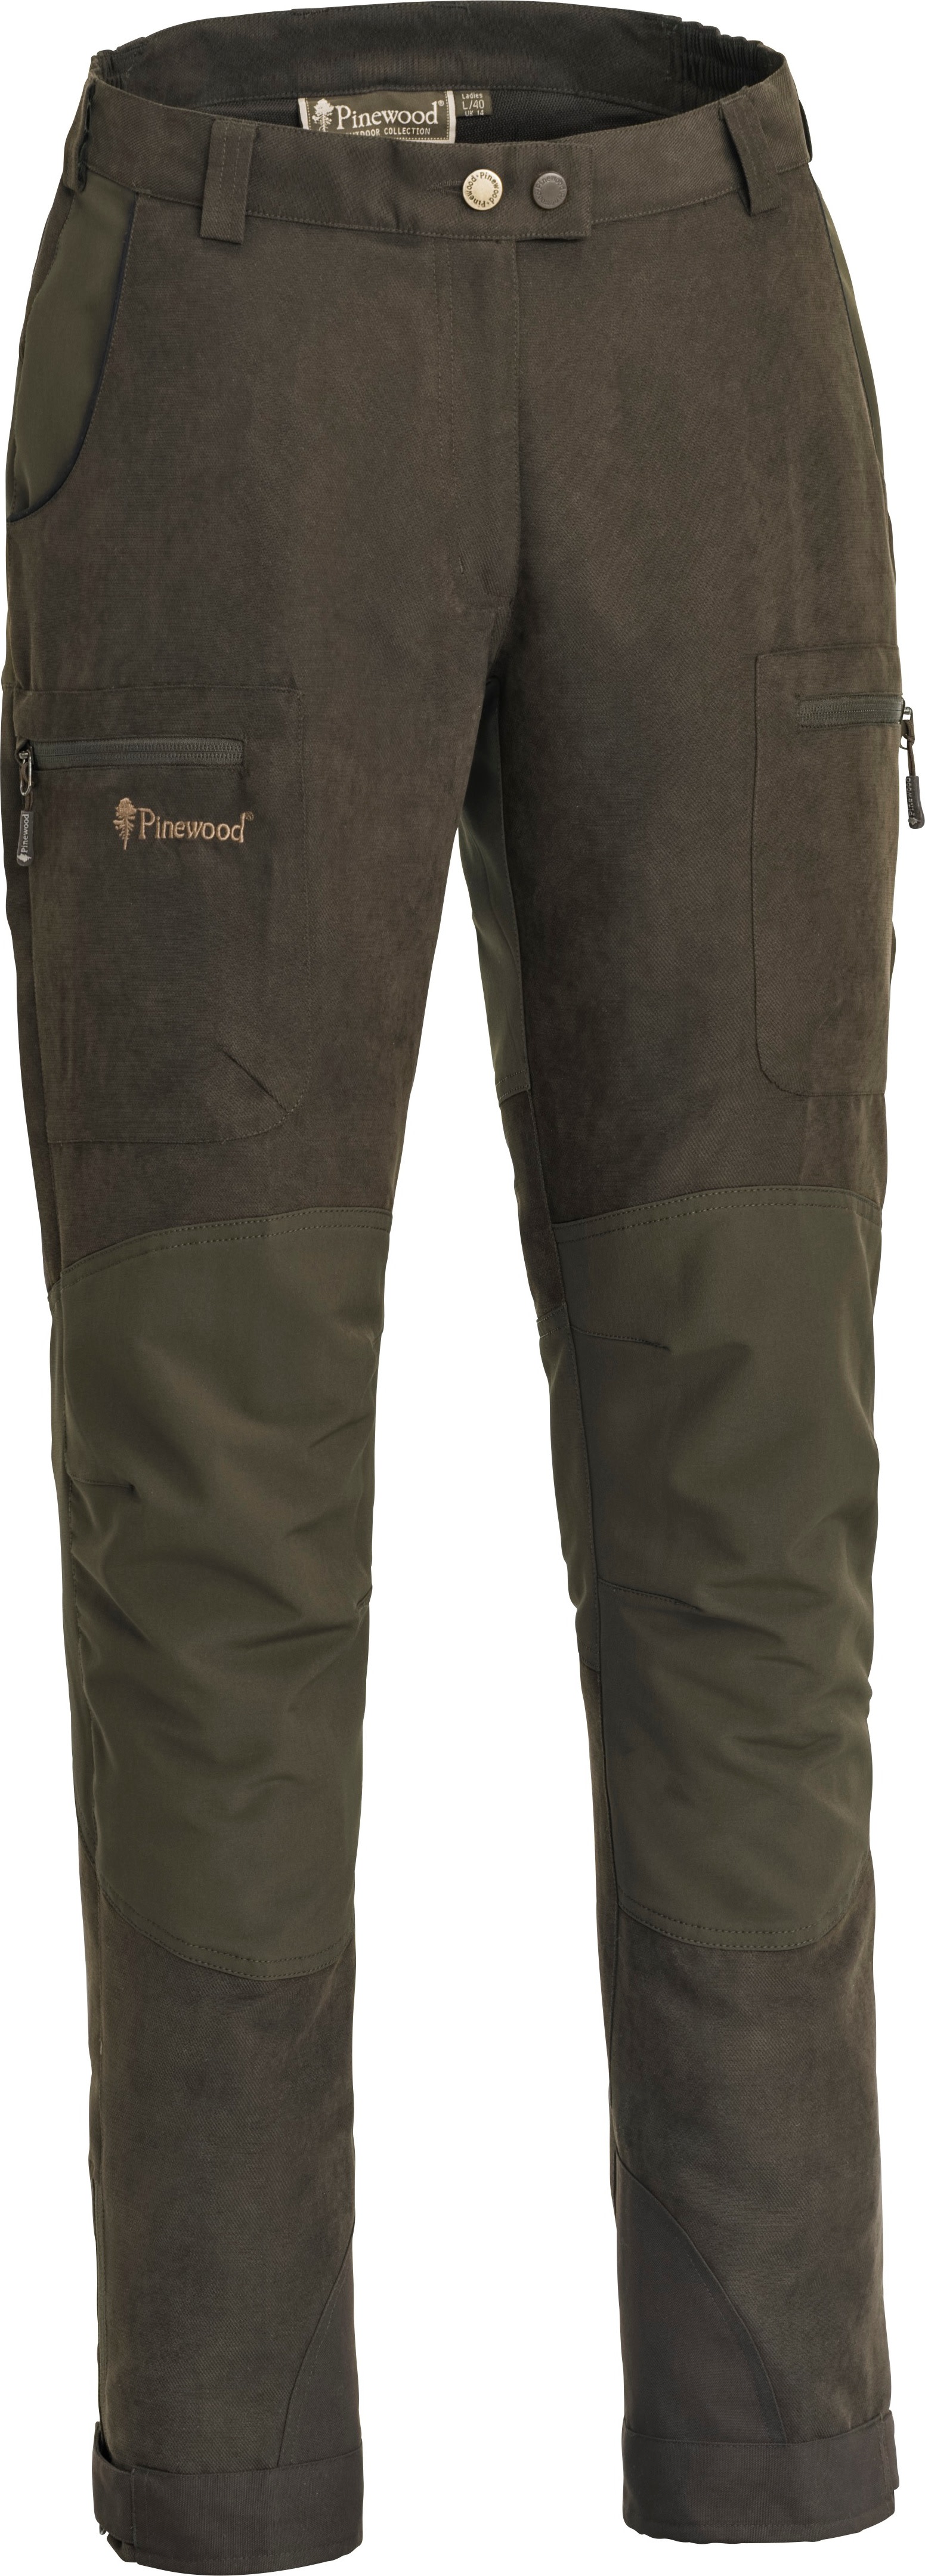 Women’s Caribou Hunt Extreme Pants Suede Brown/D.Olive